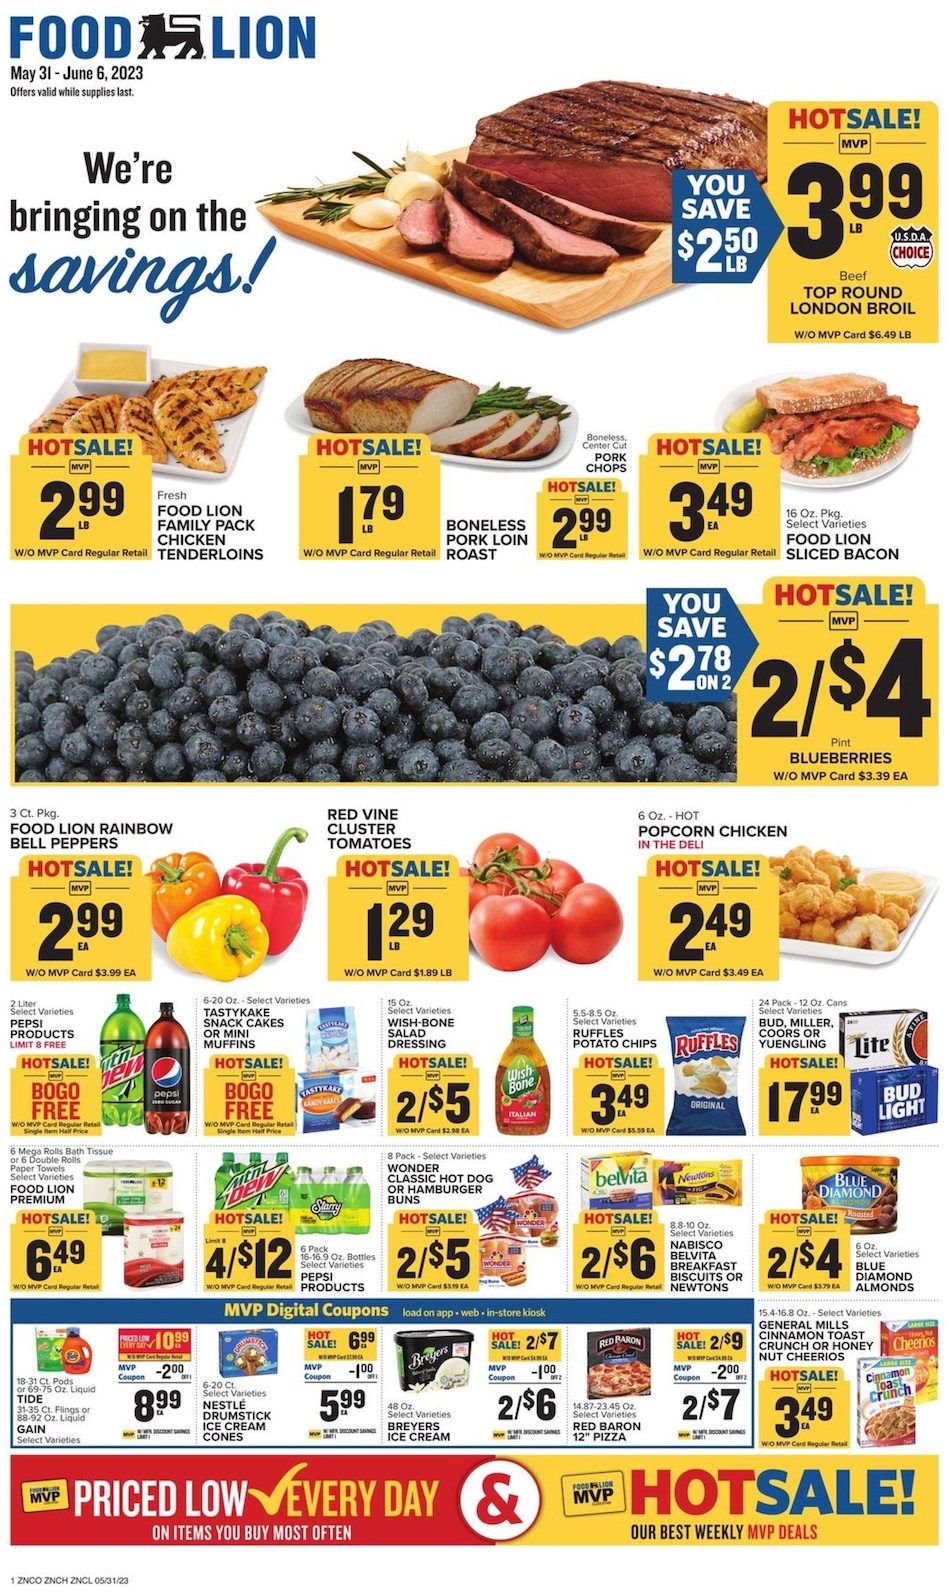 Food Lion Weekly Ad 31st May – 6th June 2023 Page 1